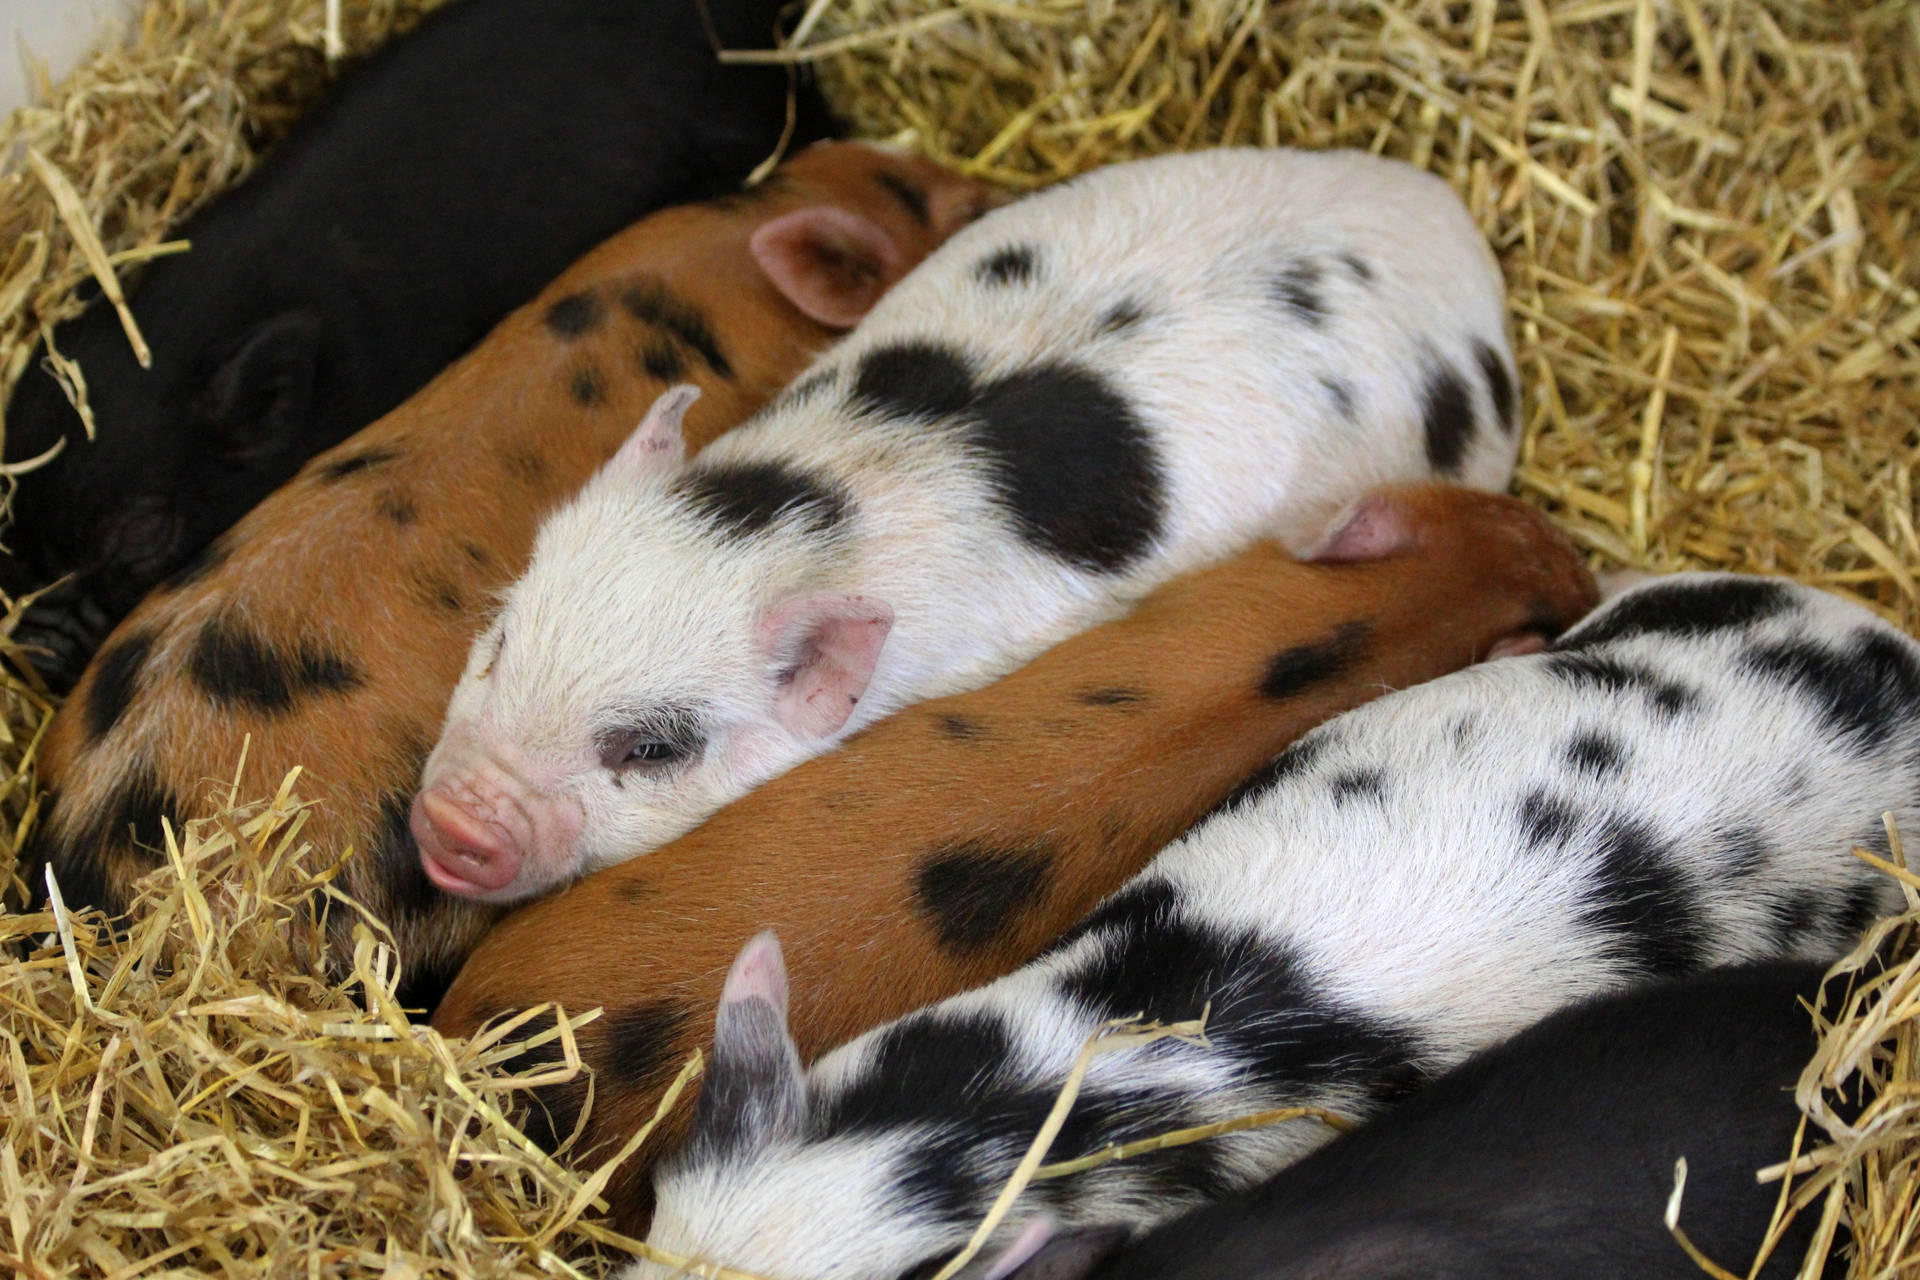 Cute Animals Spotted Piglets